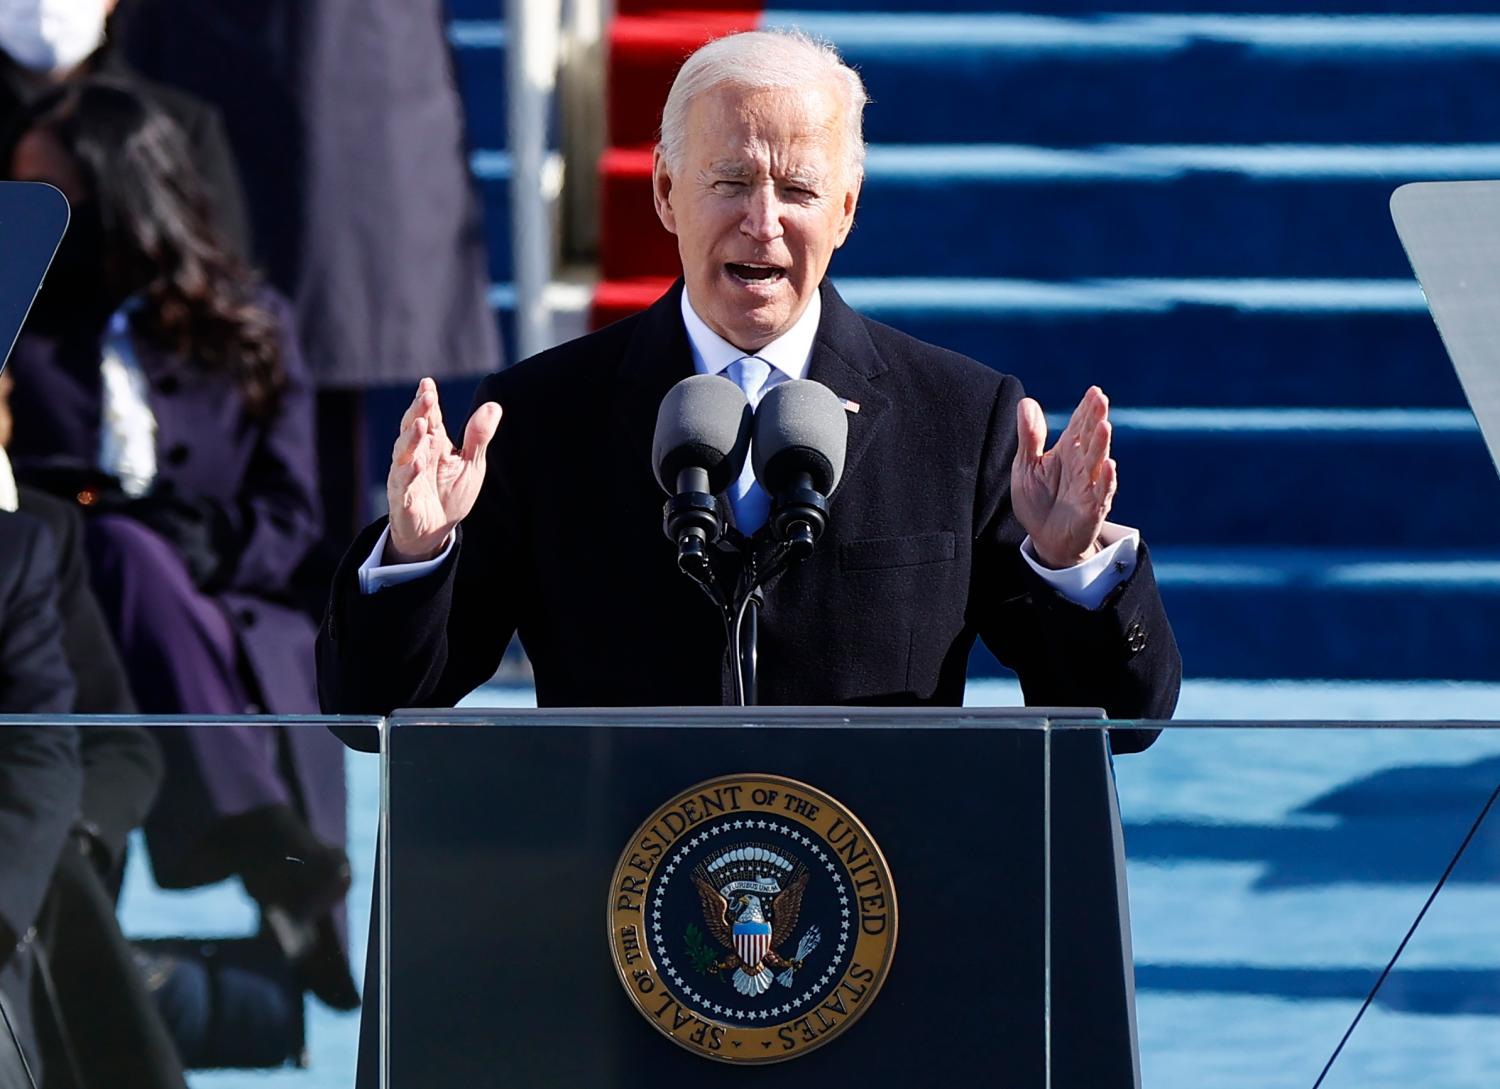 U.S. President Joe Biden delivers his speech after he was sworn in as the 46th President of the United States on the West Front of the U.S. Capitol in Washington, U.S., January 20, 2021. REUTERS/Jim Bourg